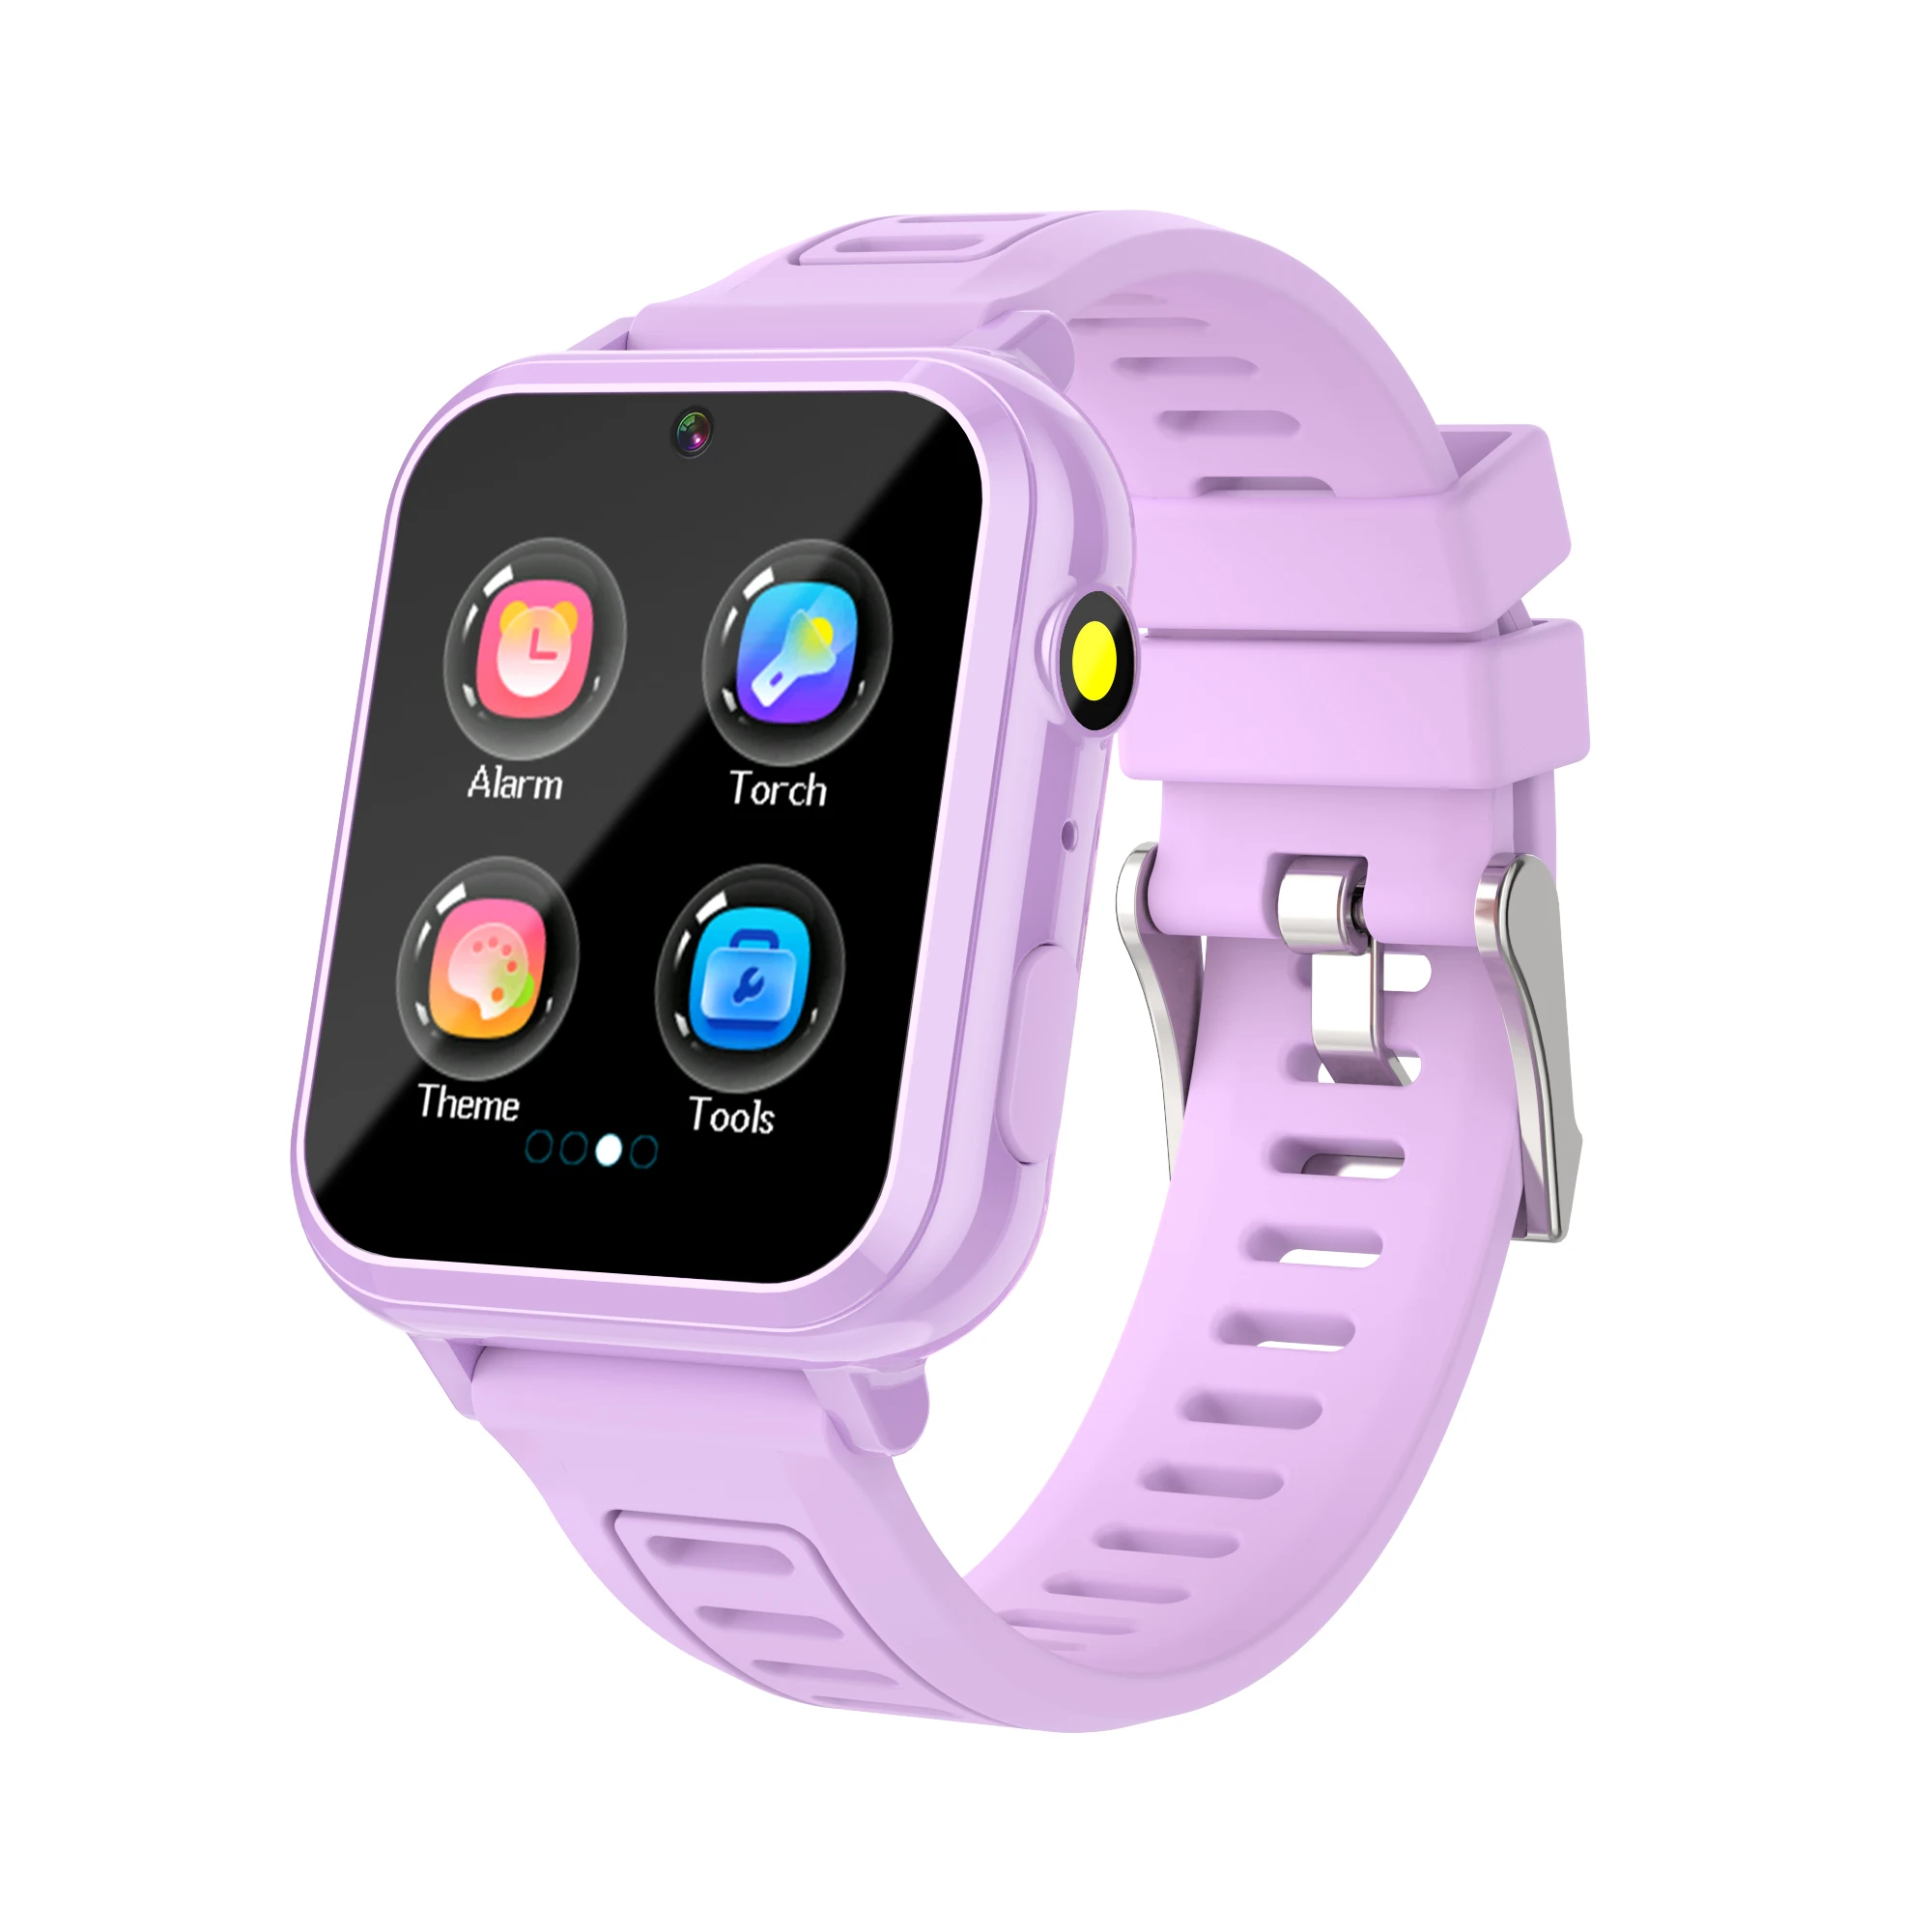 

2022 New Arrival Video Call 4G Baby Kids Smart Watch Support Sim Card IOS Android Phone S16 Smartwatch with Camera